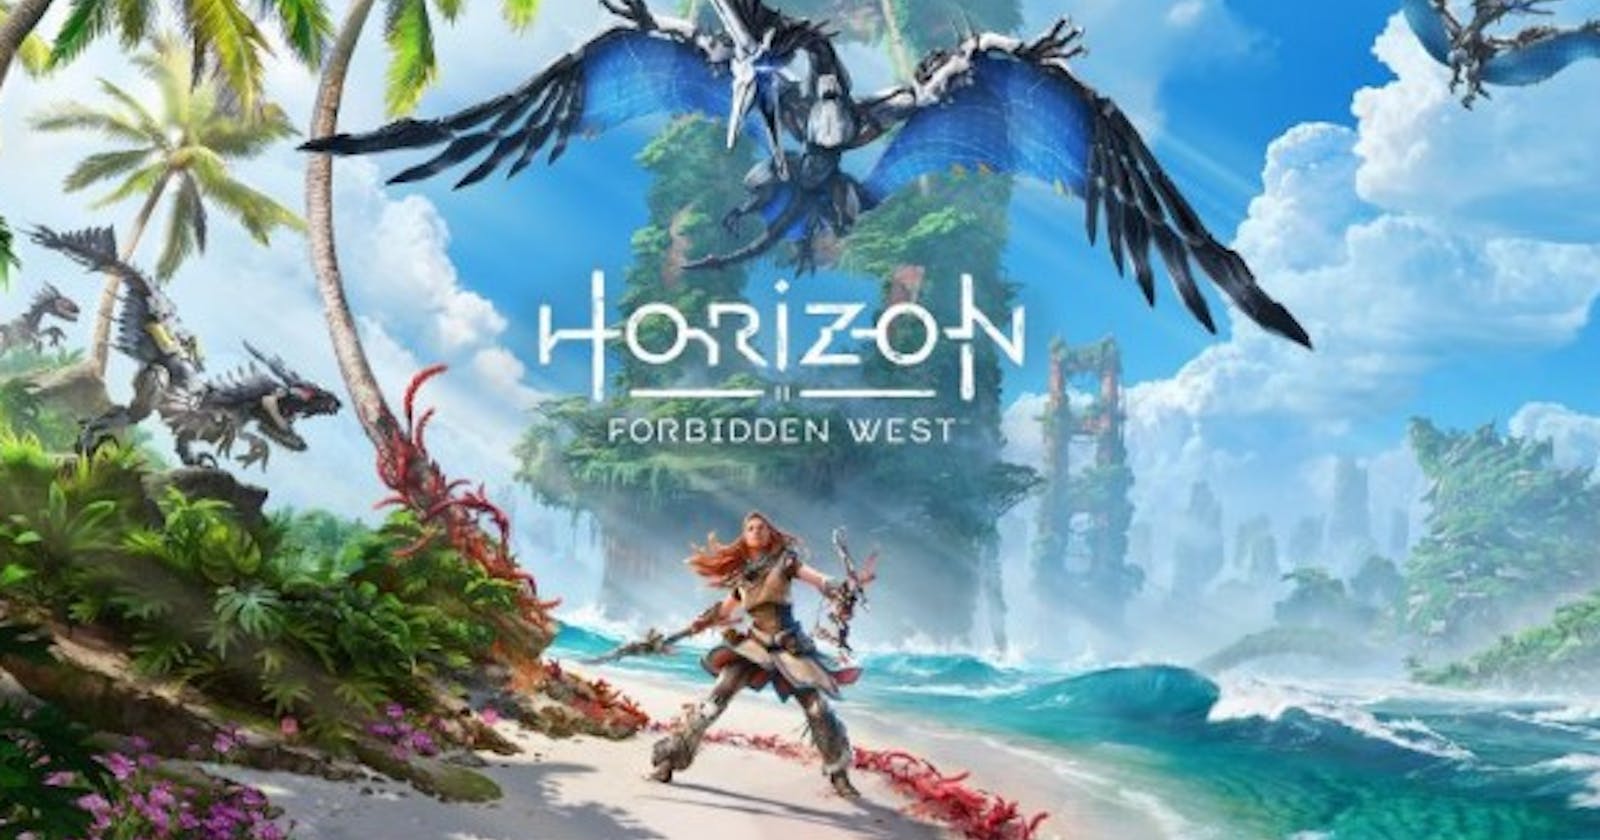 [REVIEW] Horizon Forbidden West—Solid Action RPG with Great Visuals